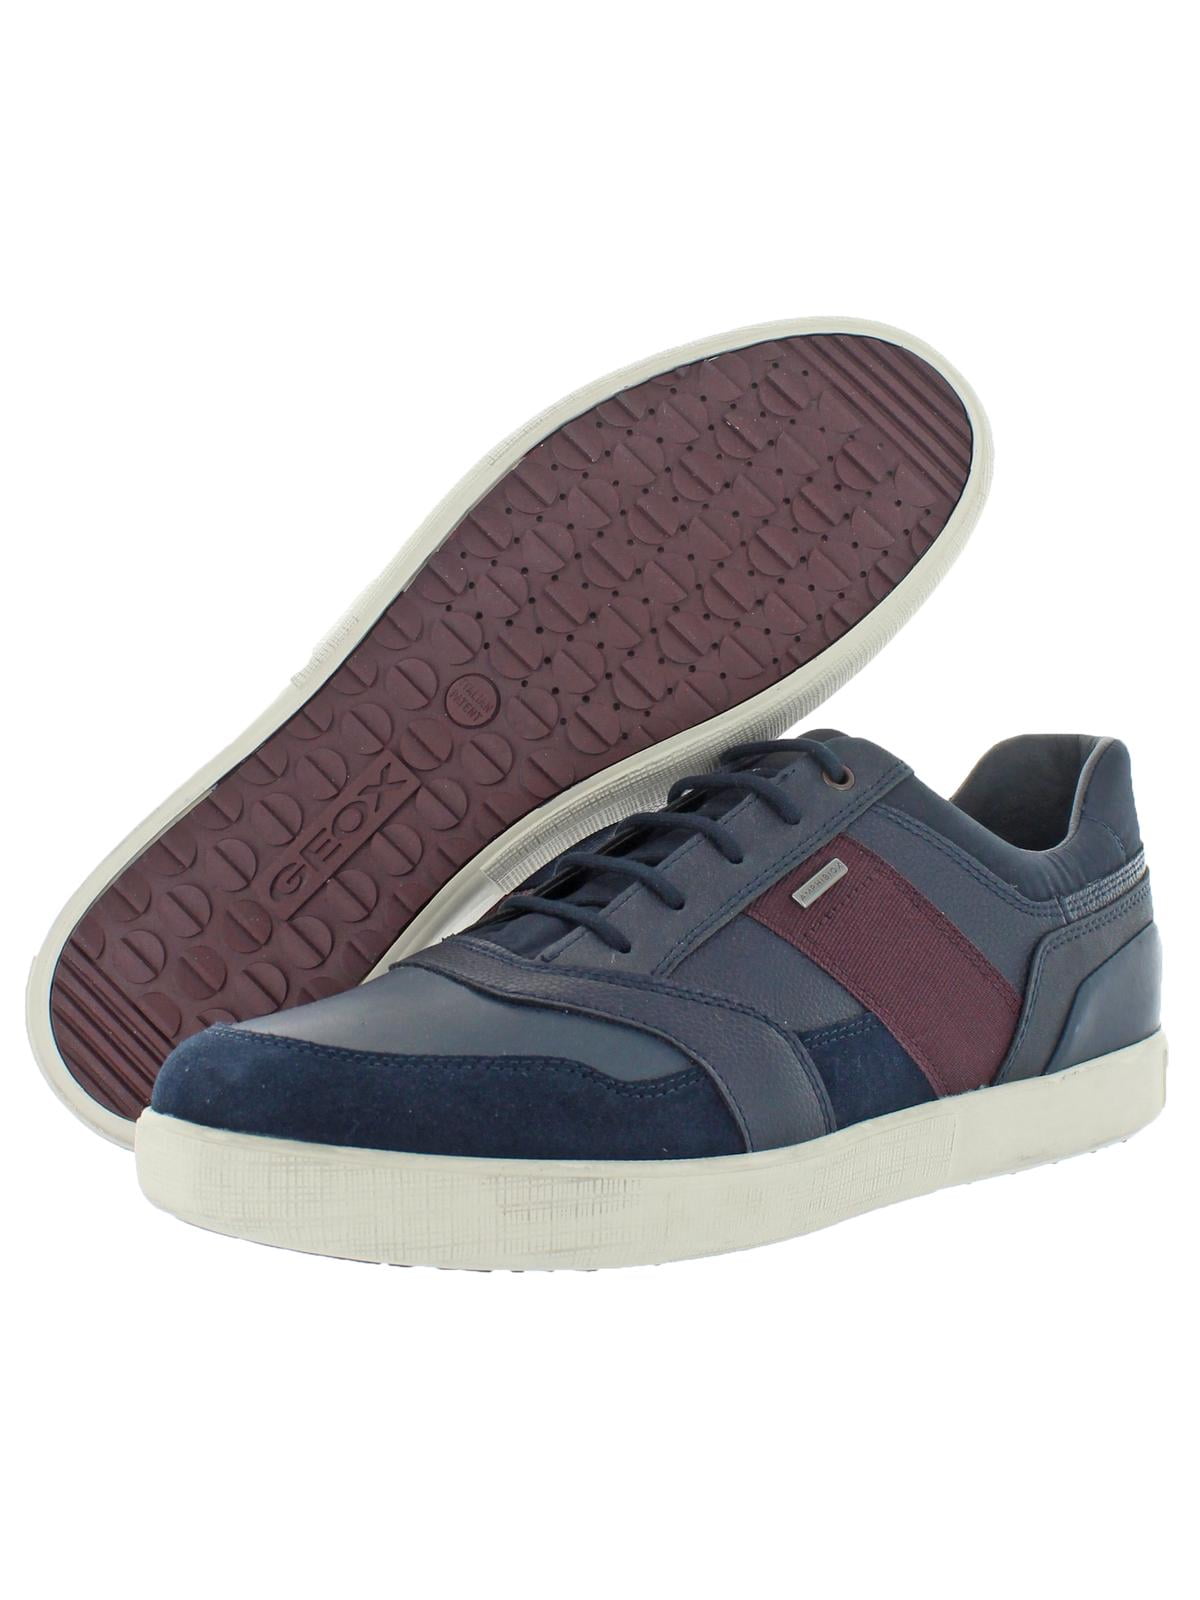 Geox Mens Leather Sneakers -